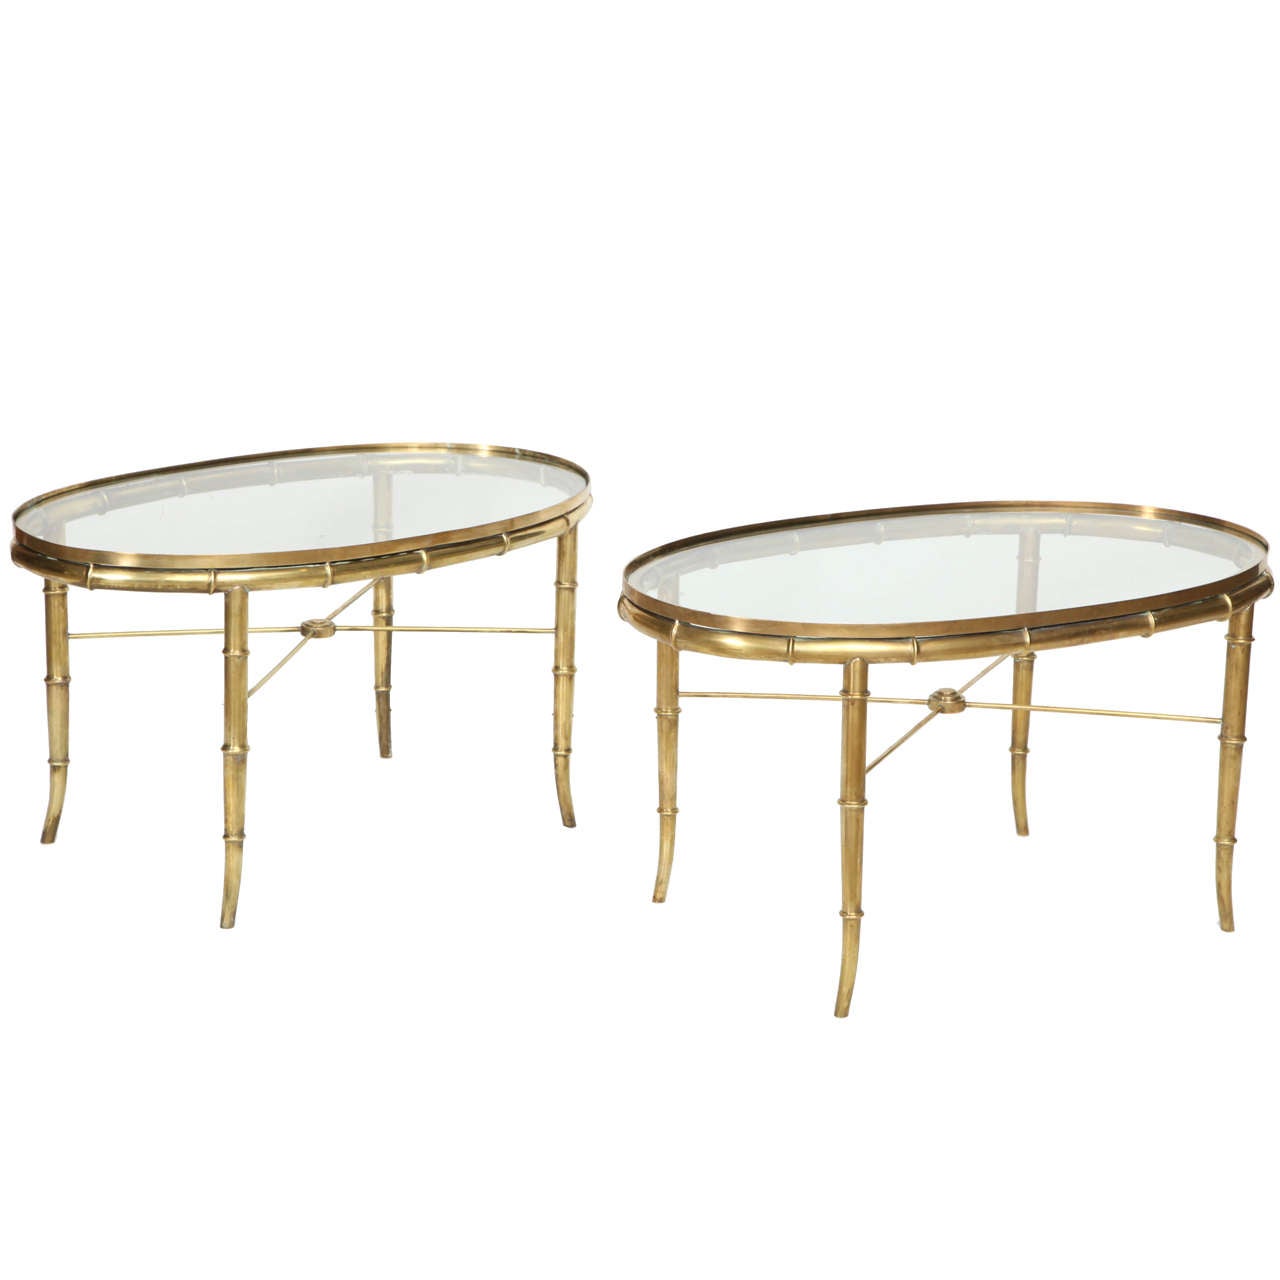 Pair of side table by Mastercraft